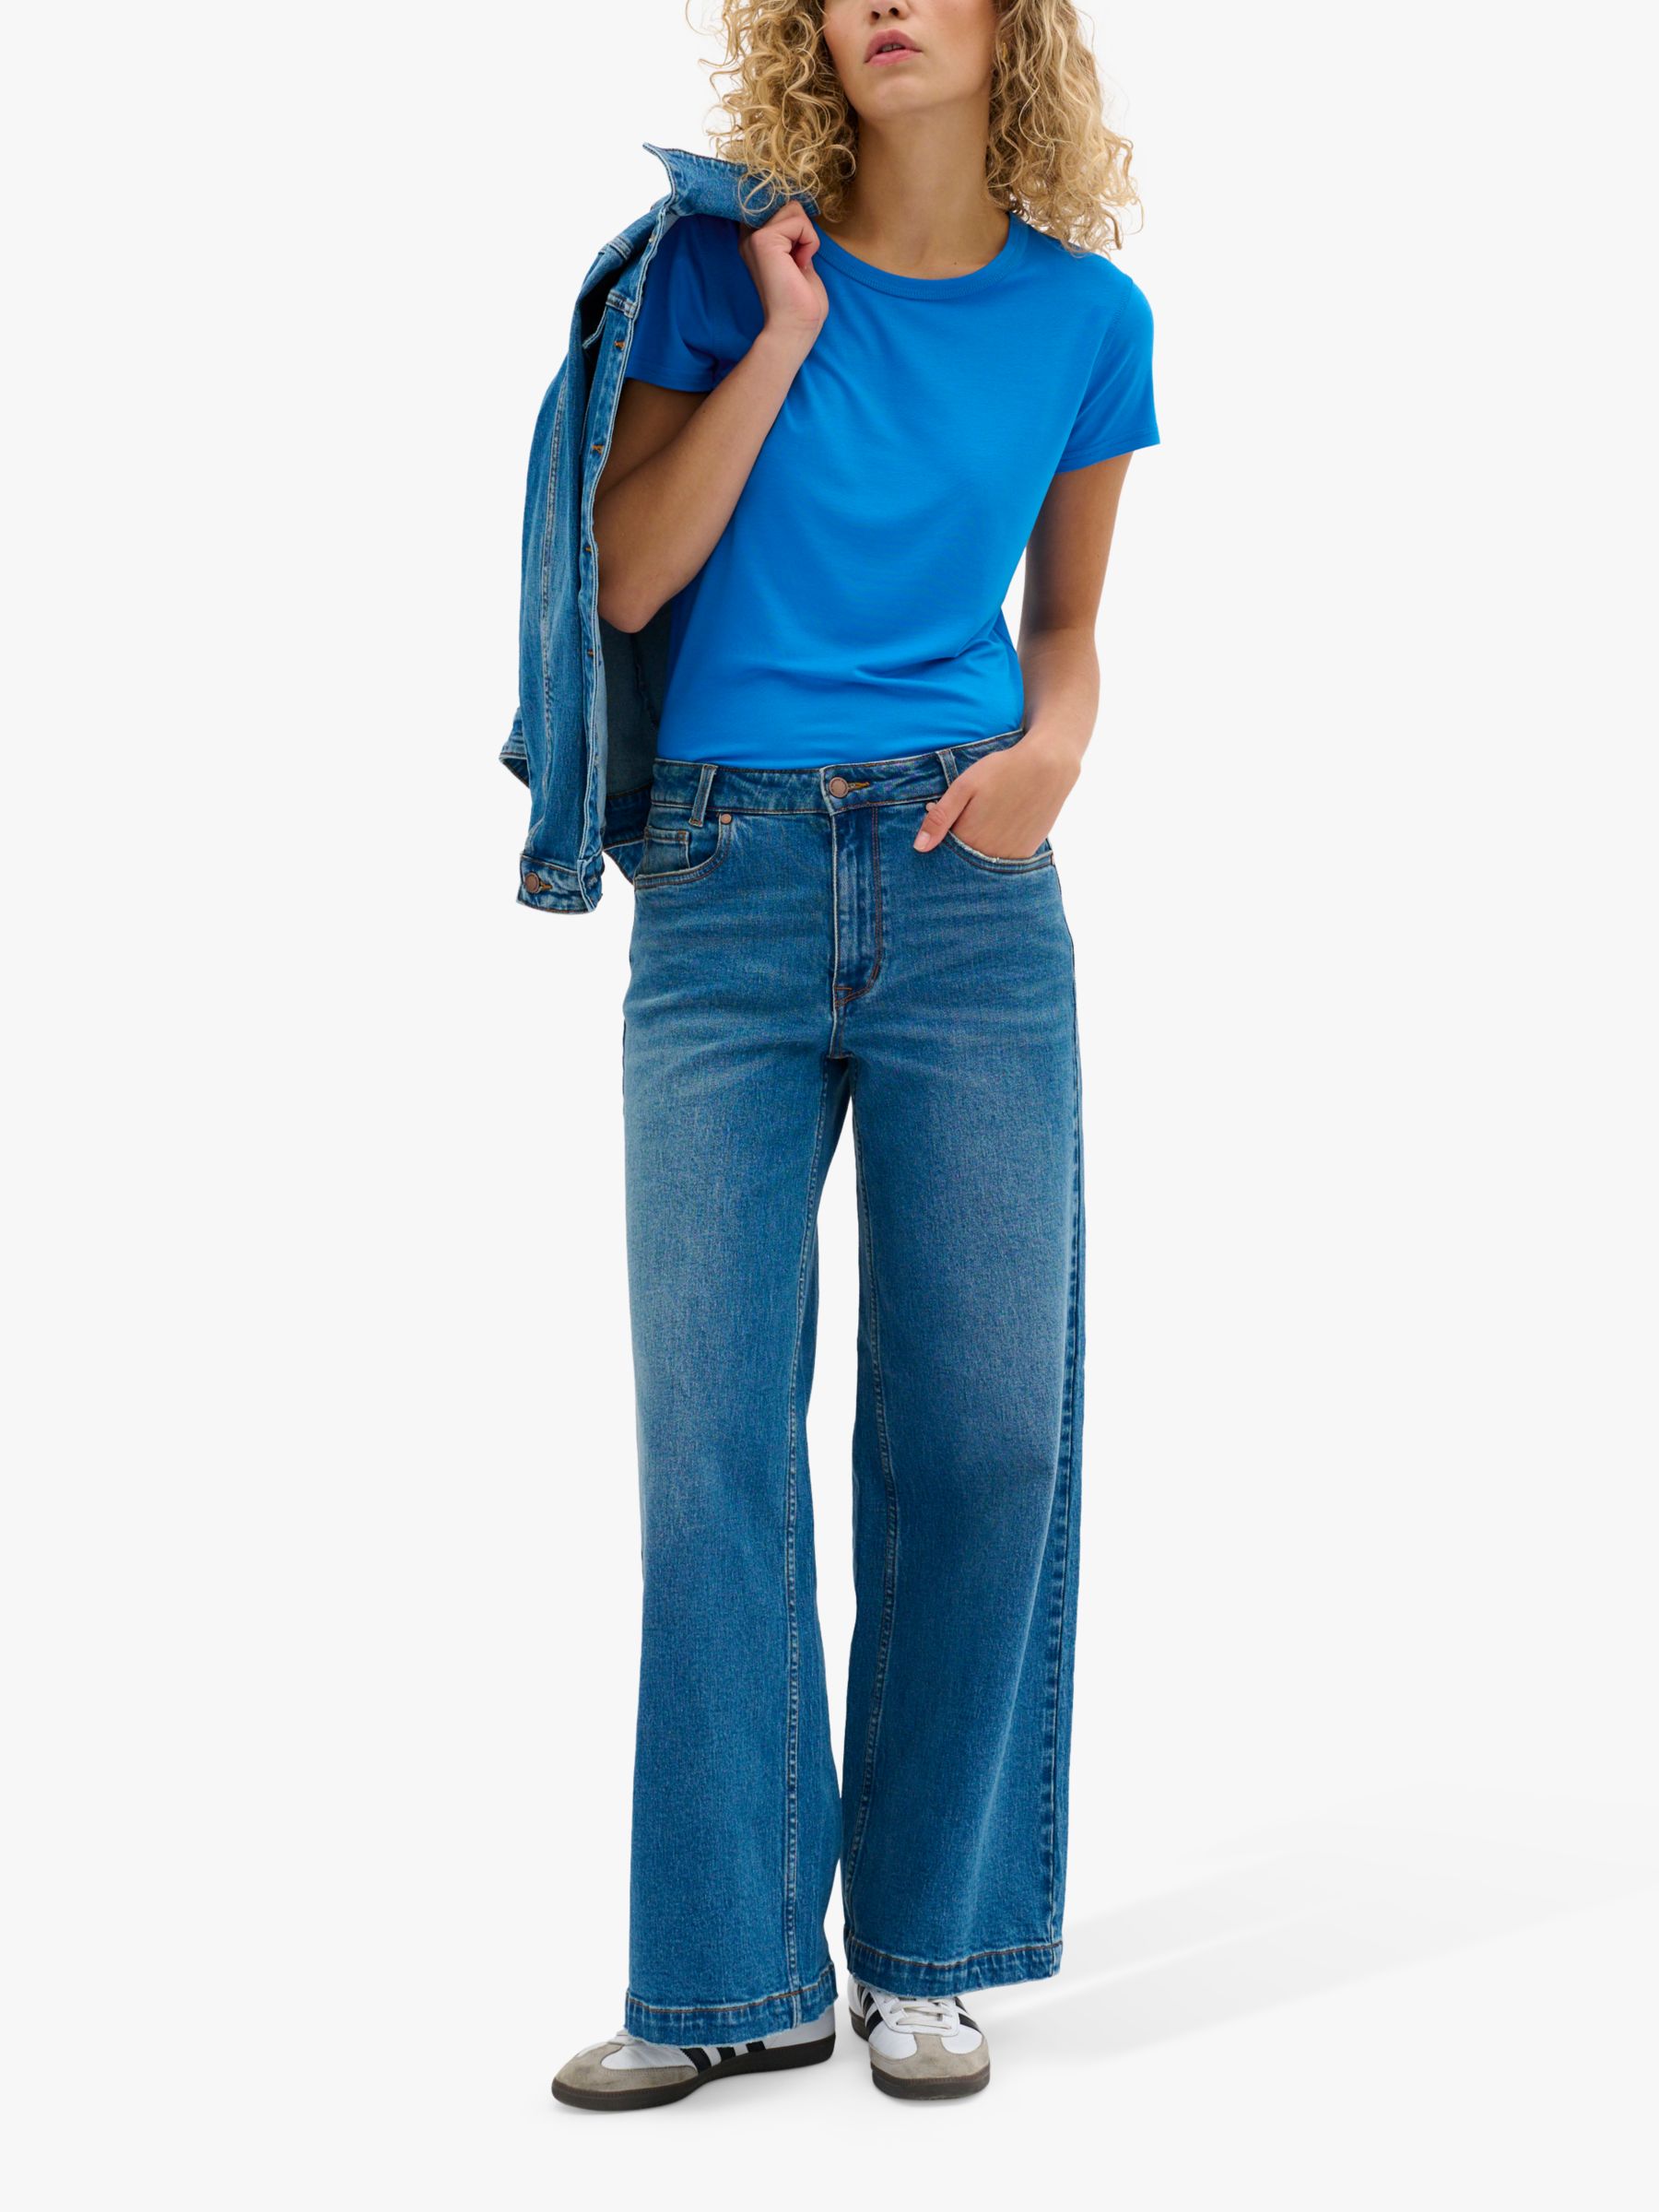 Buy MY ESSENTIAL WARDROBE The Modal Tee, Directoire Blue Online at johnlewis.com